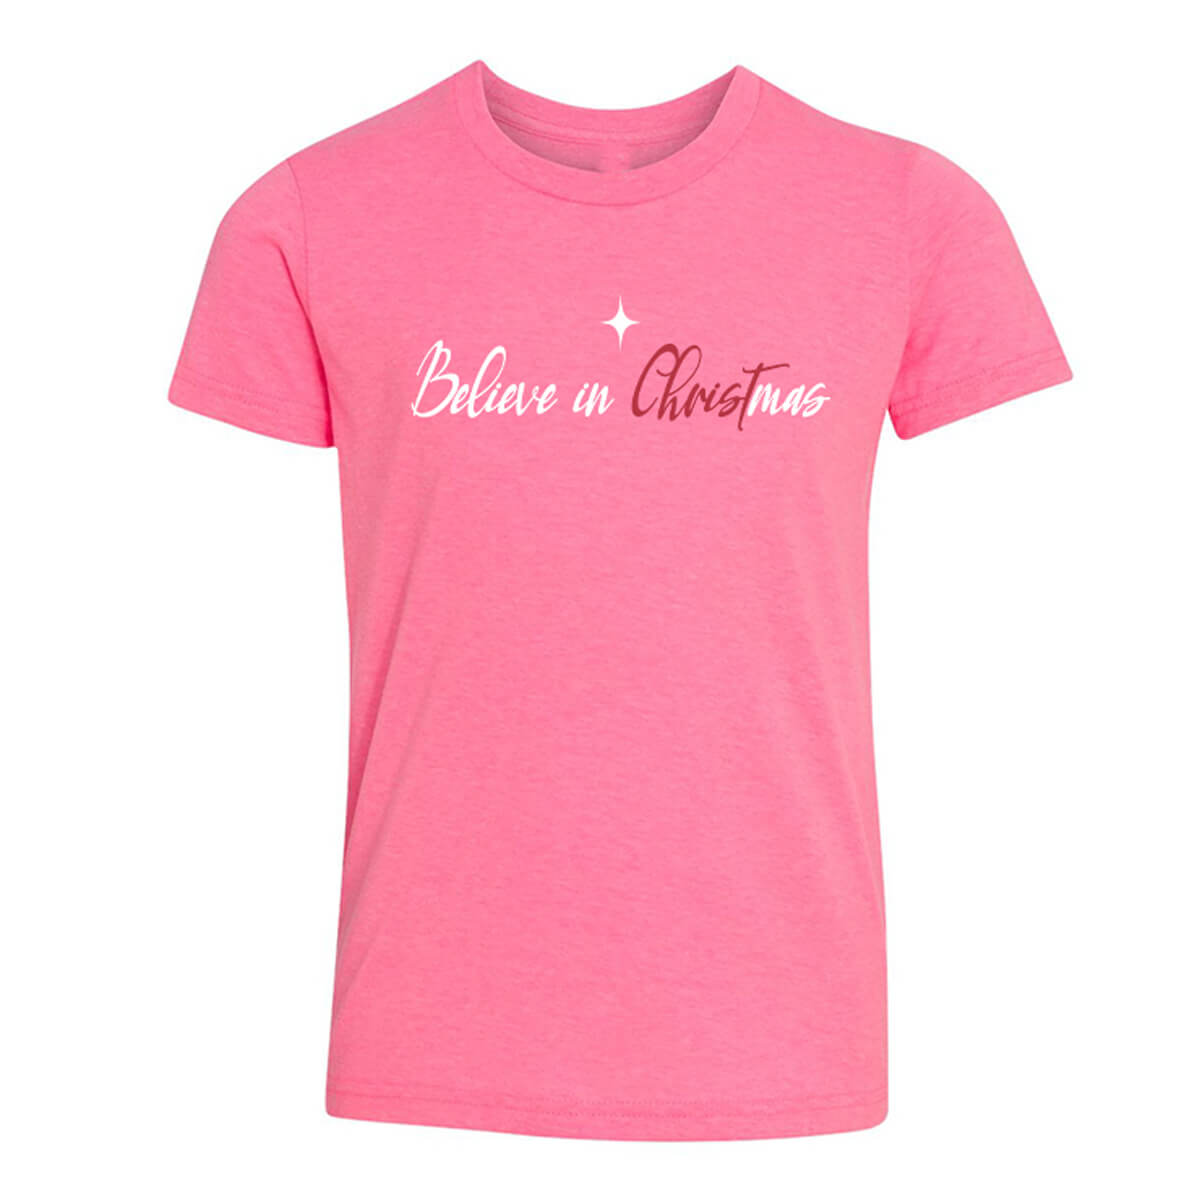 Believe In Christmas Youth T Shirt